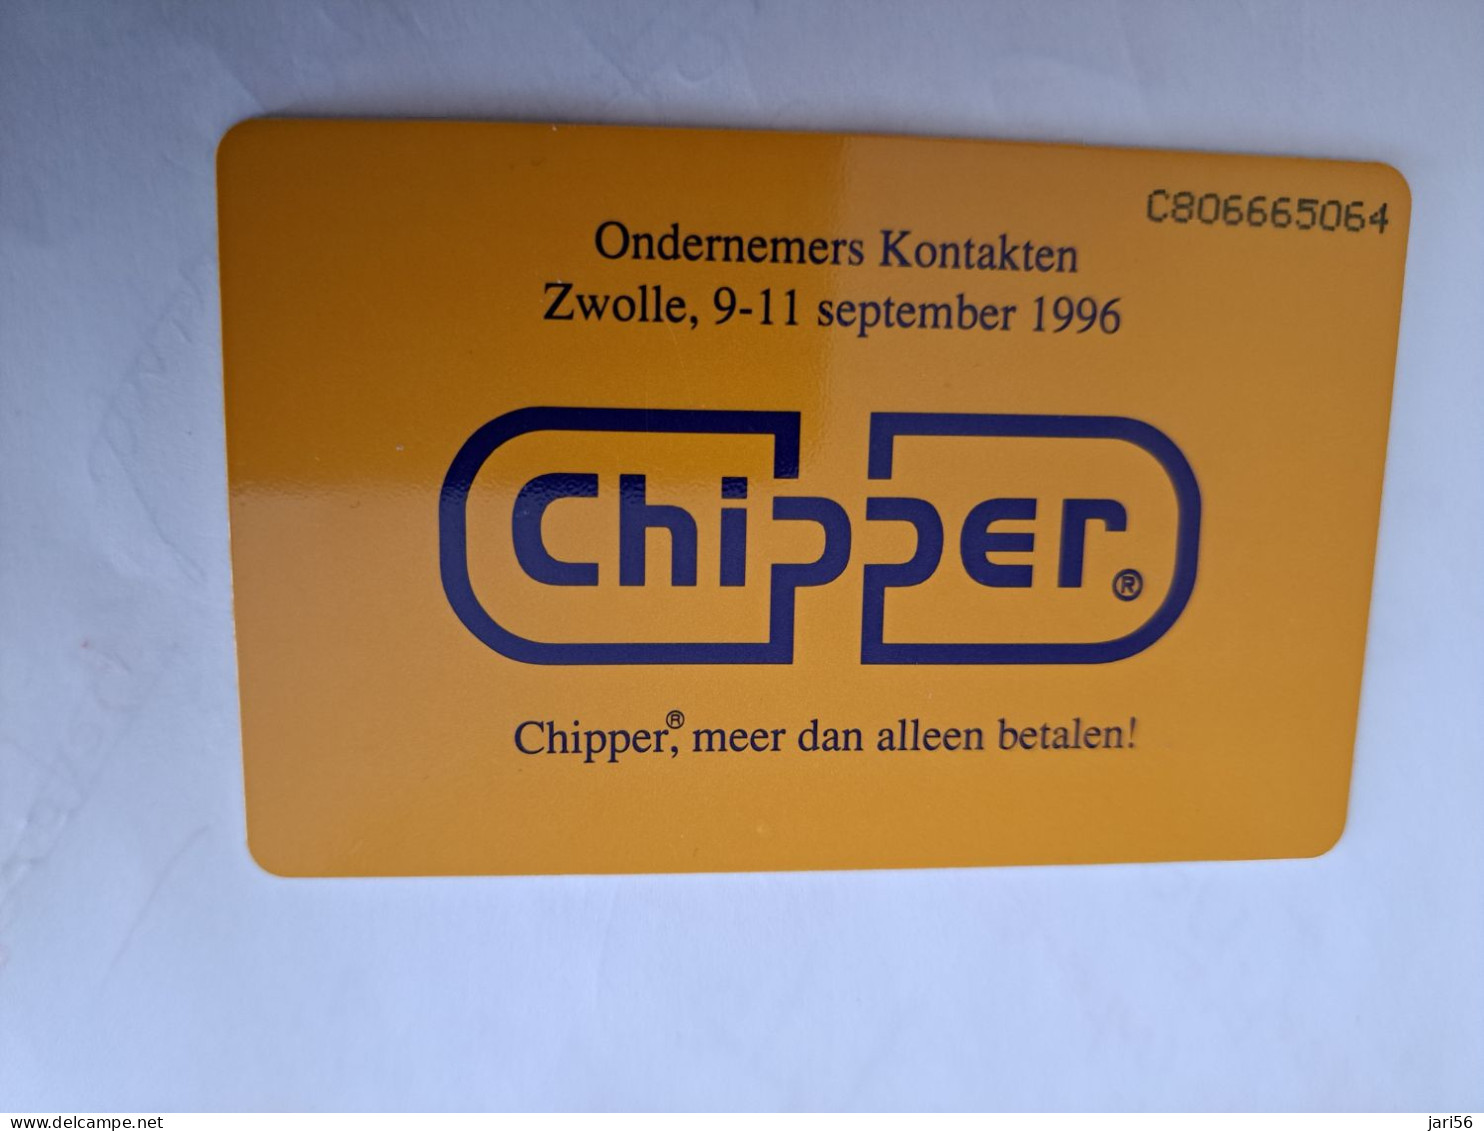 NETHERLANDS / CHIP ADVERTISING CARD/ HFL 2,50/ ING BANK ZWOLLE/ CHIPPER     /  CRD 341   /MINT /   ** 14142** - Privées